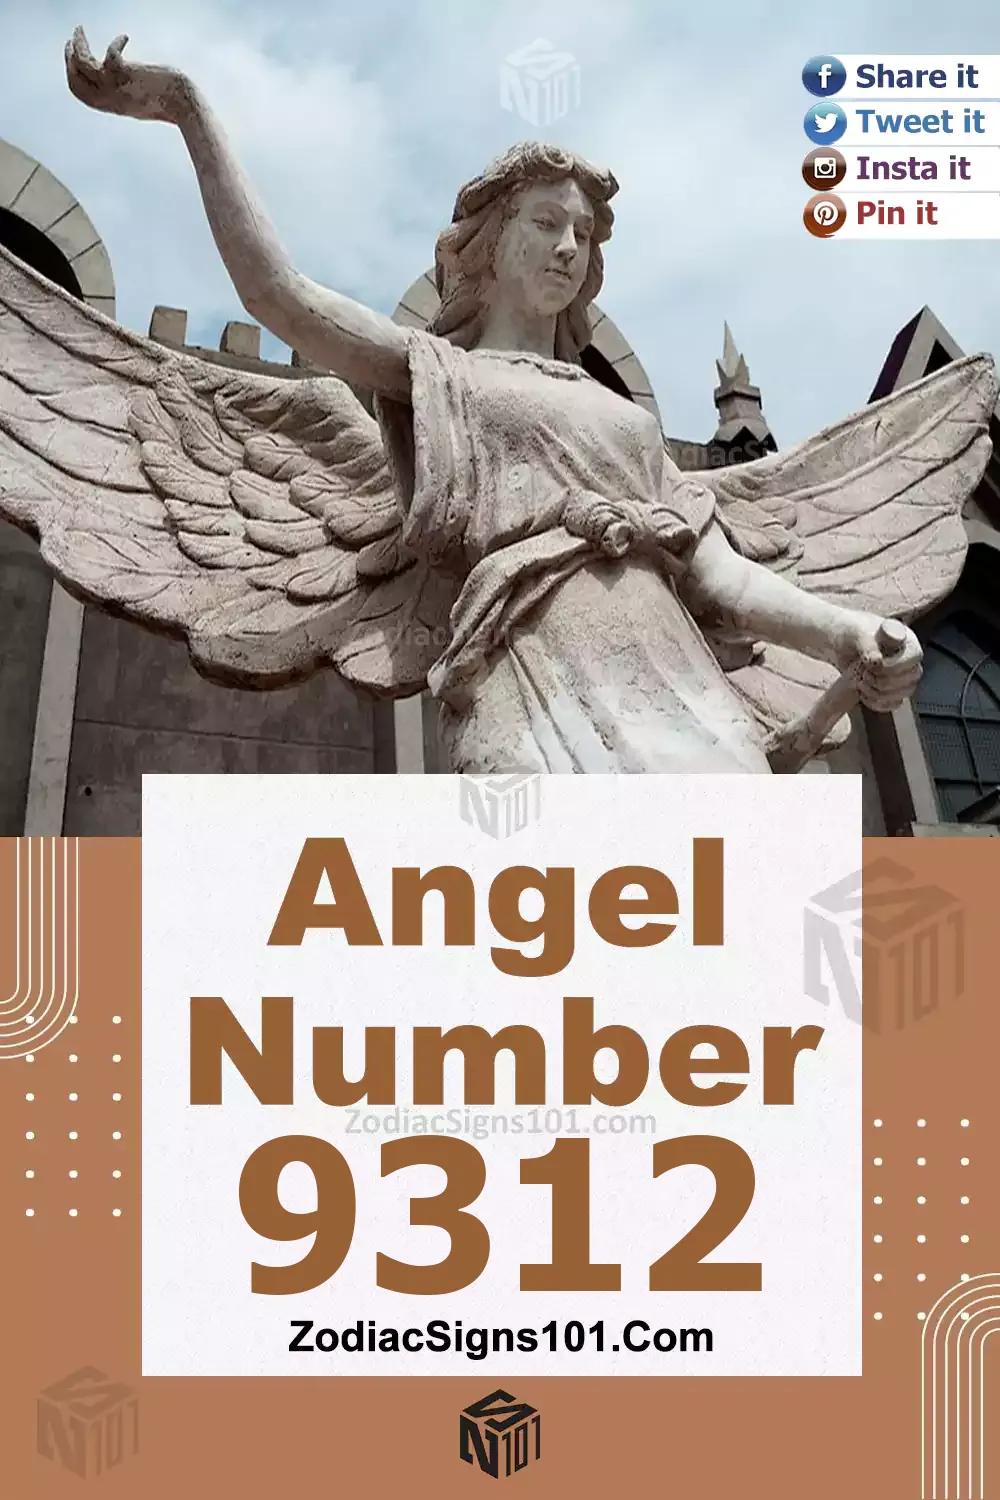 9312 Angel Number Meaning